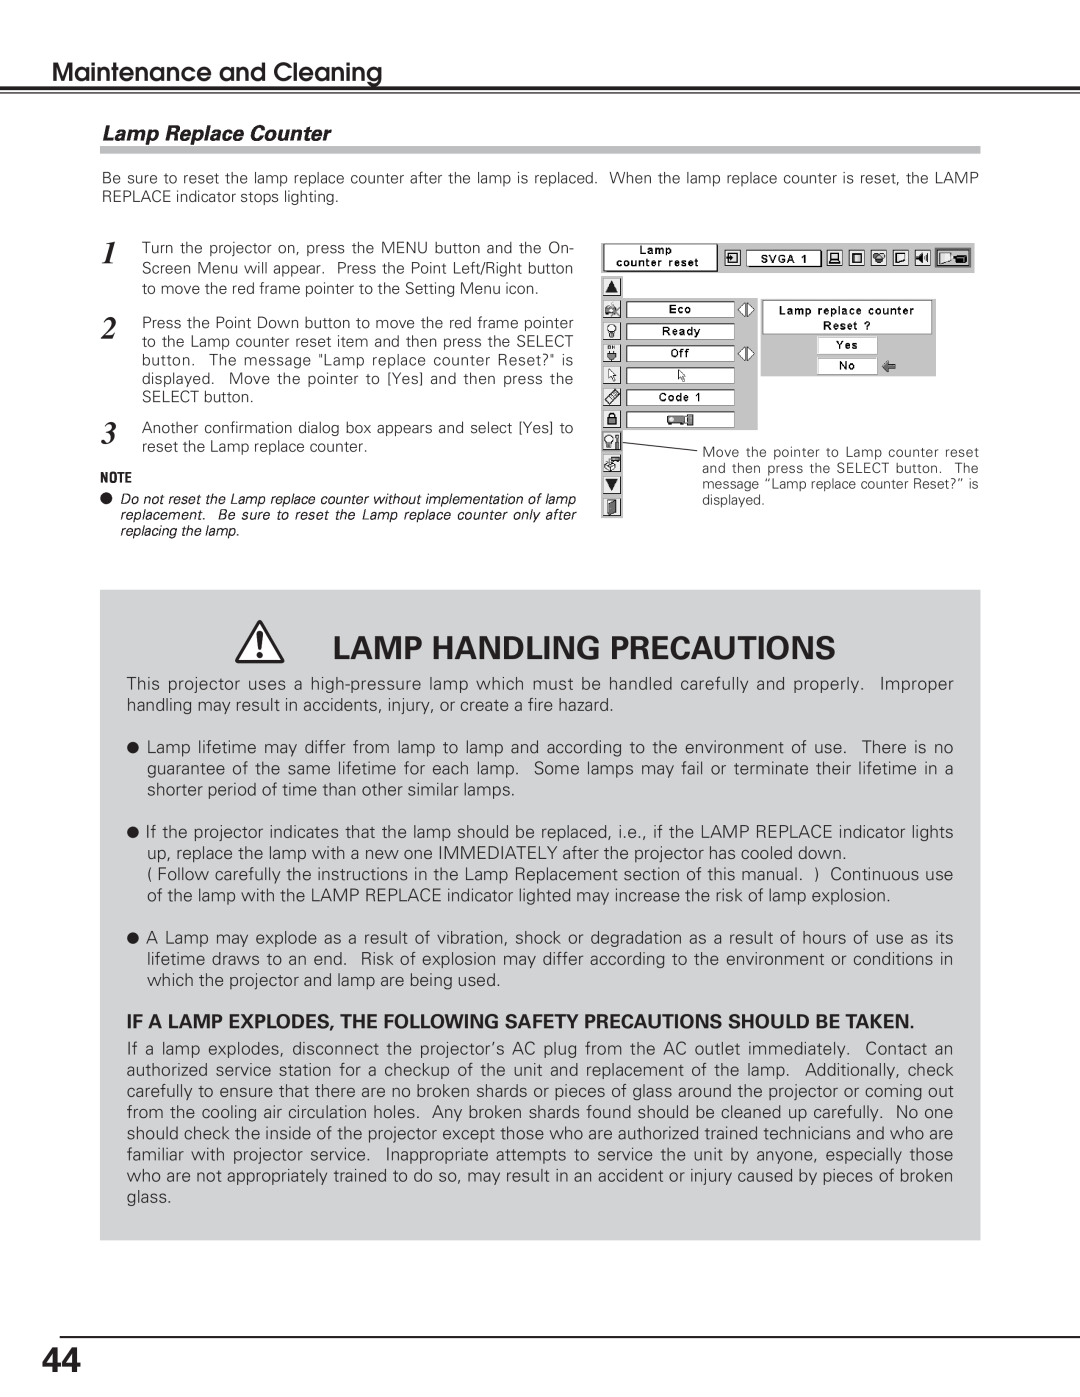 Sanyo PLC-SL20 owner manual Lamp Replace Counter, Lamp Handling Precautions, Maintenance and Cleaning 